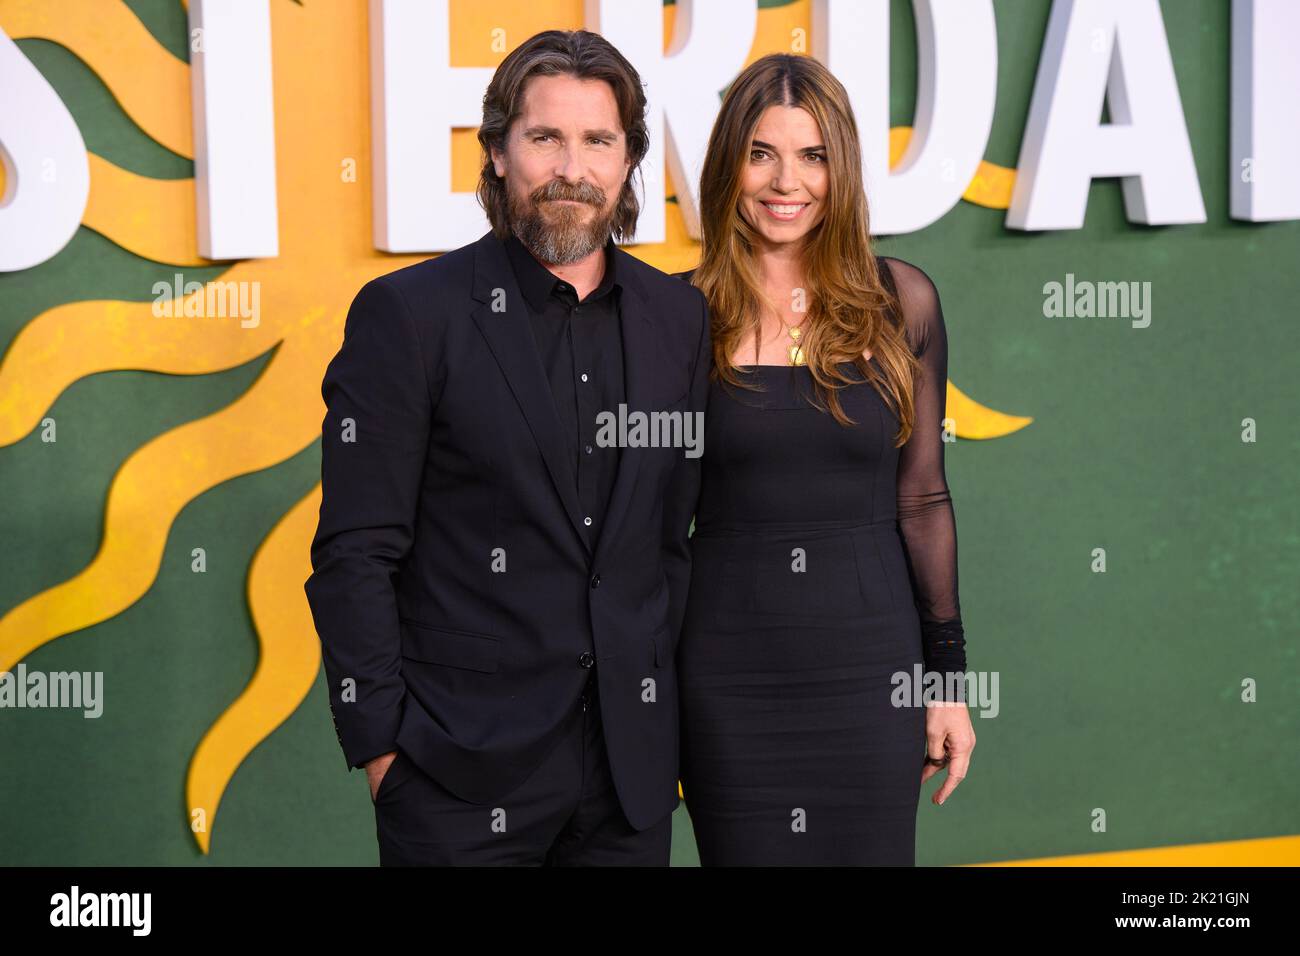 London, UK. 21 September 2022. Christian Bale and Sibi Blazic attending the European premiere of Amsterdam at the Odeon Luxe Leicester Square Cinema, London Picture date: Thursday September 21, 2022. Photo credit should read: Matt Crossick/Empics/Alamy Live News Stock Photo